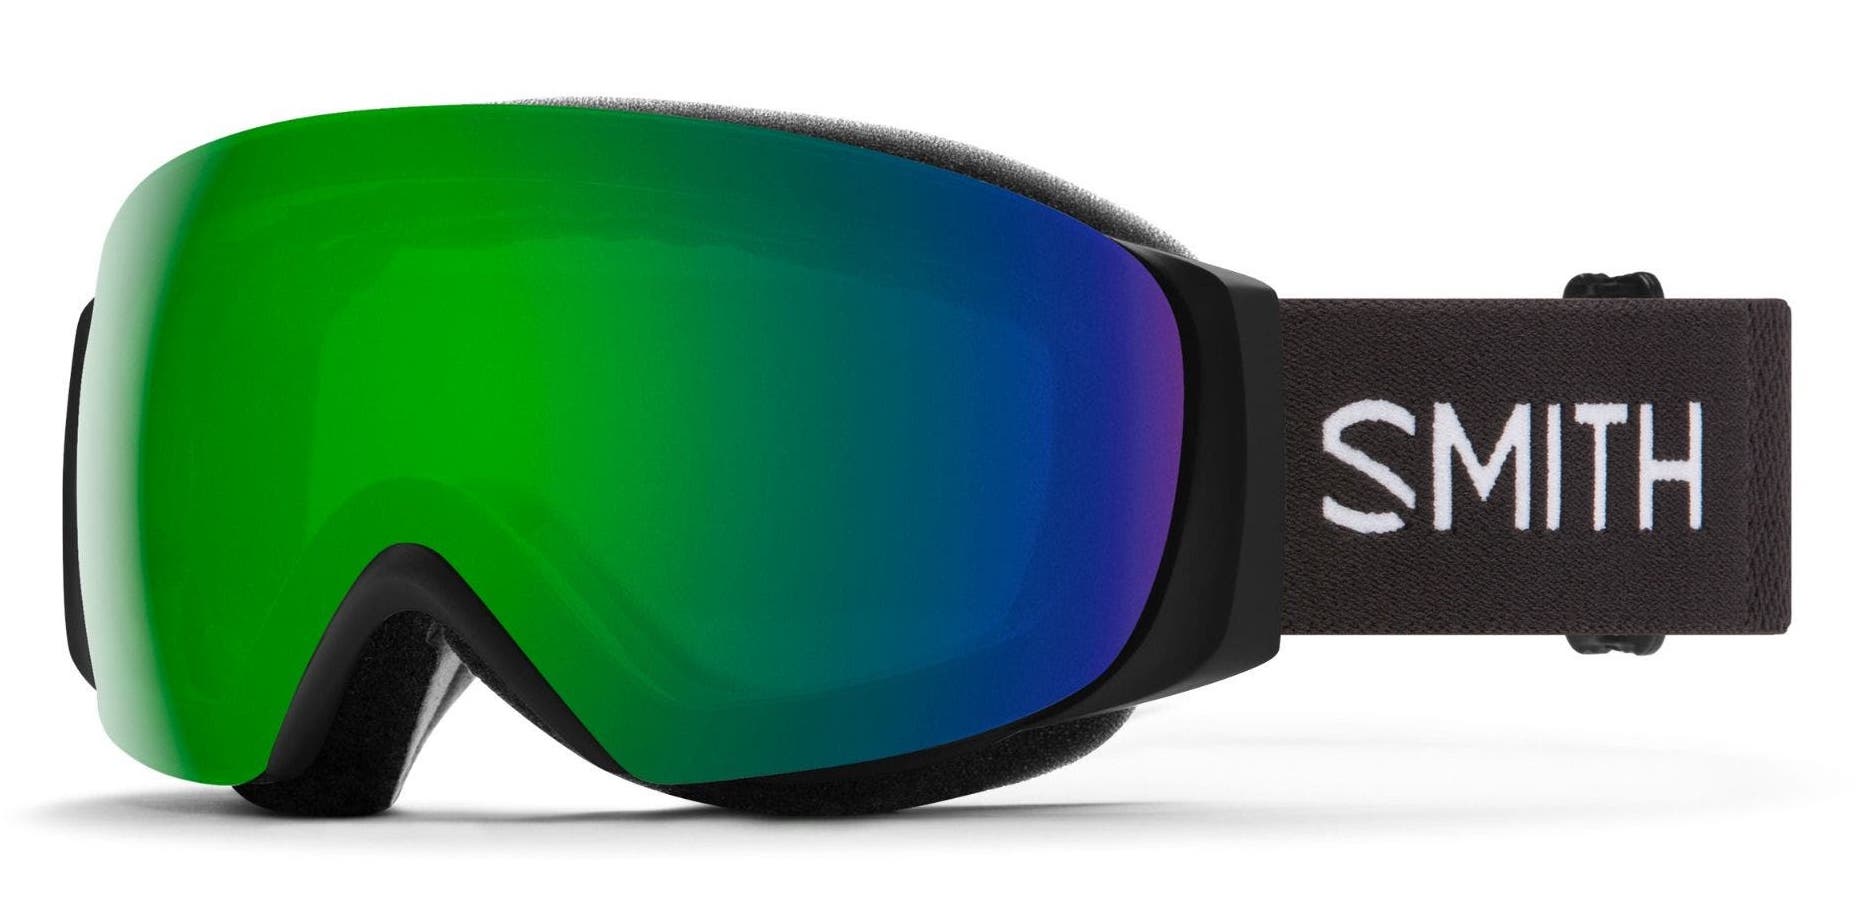 Best Ski & Snow Goggles for Small Faces | SportRx